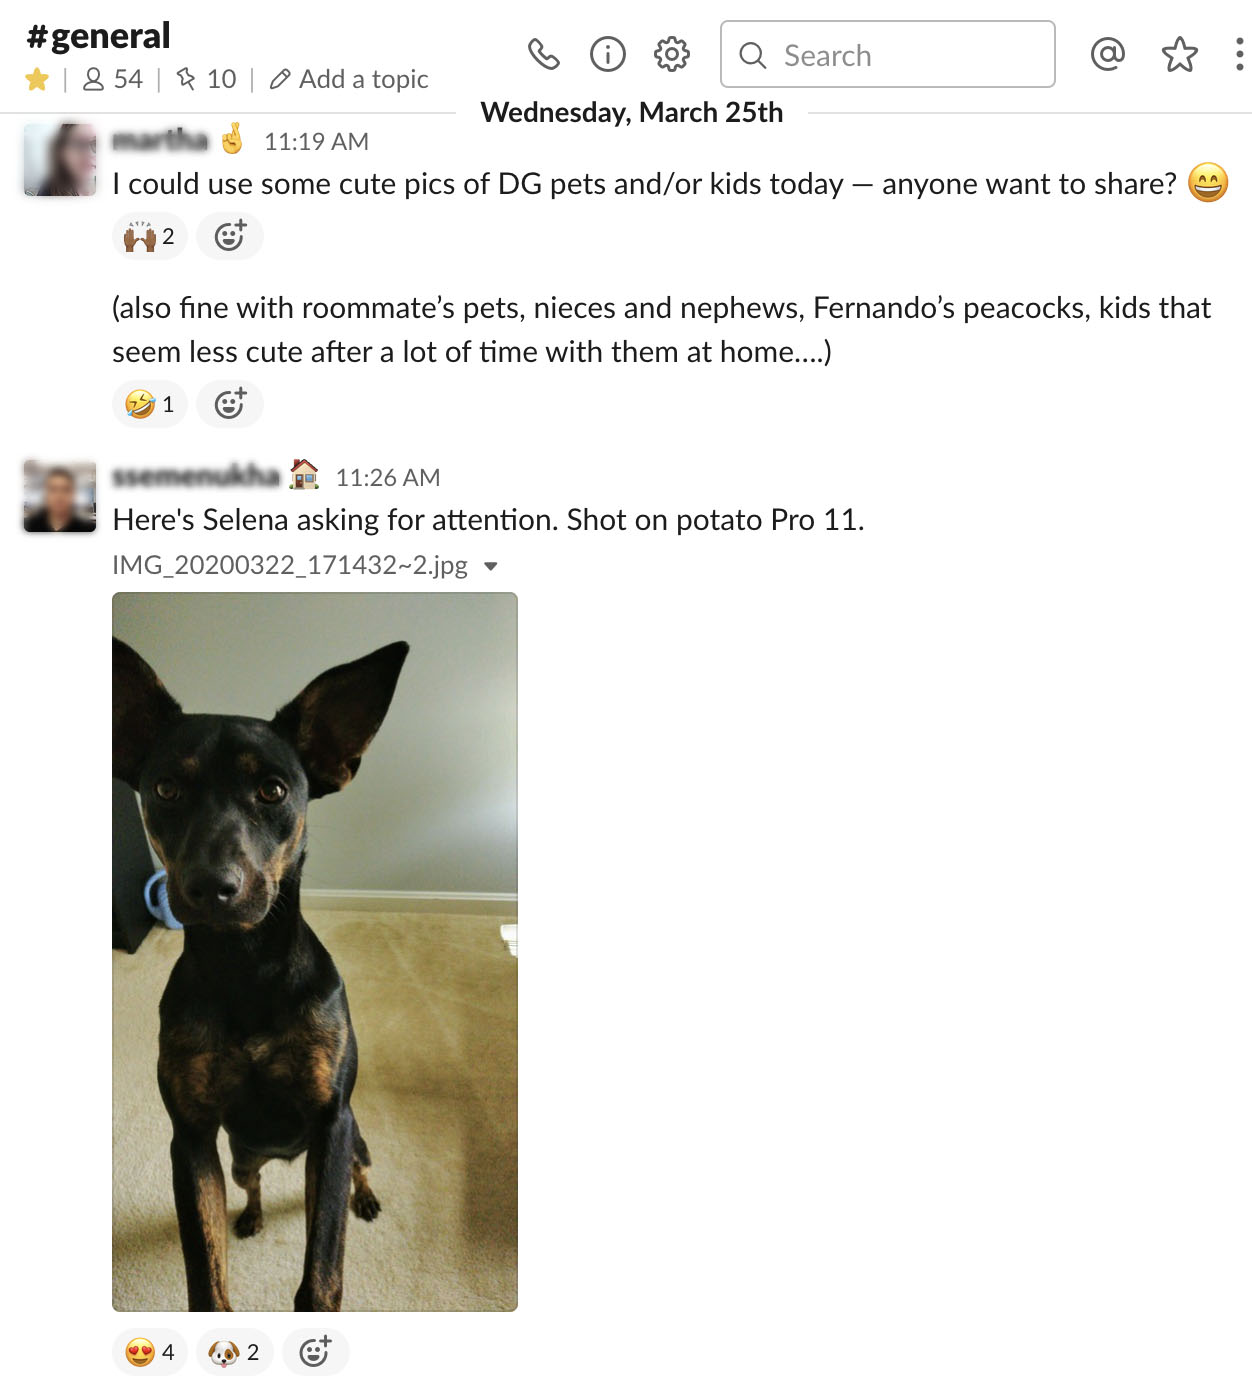 A slack request for photos of children and dogs followed by a photo of a dog